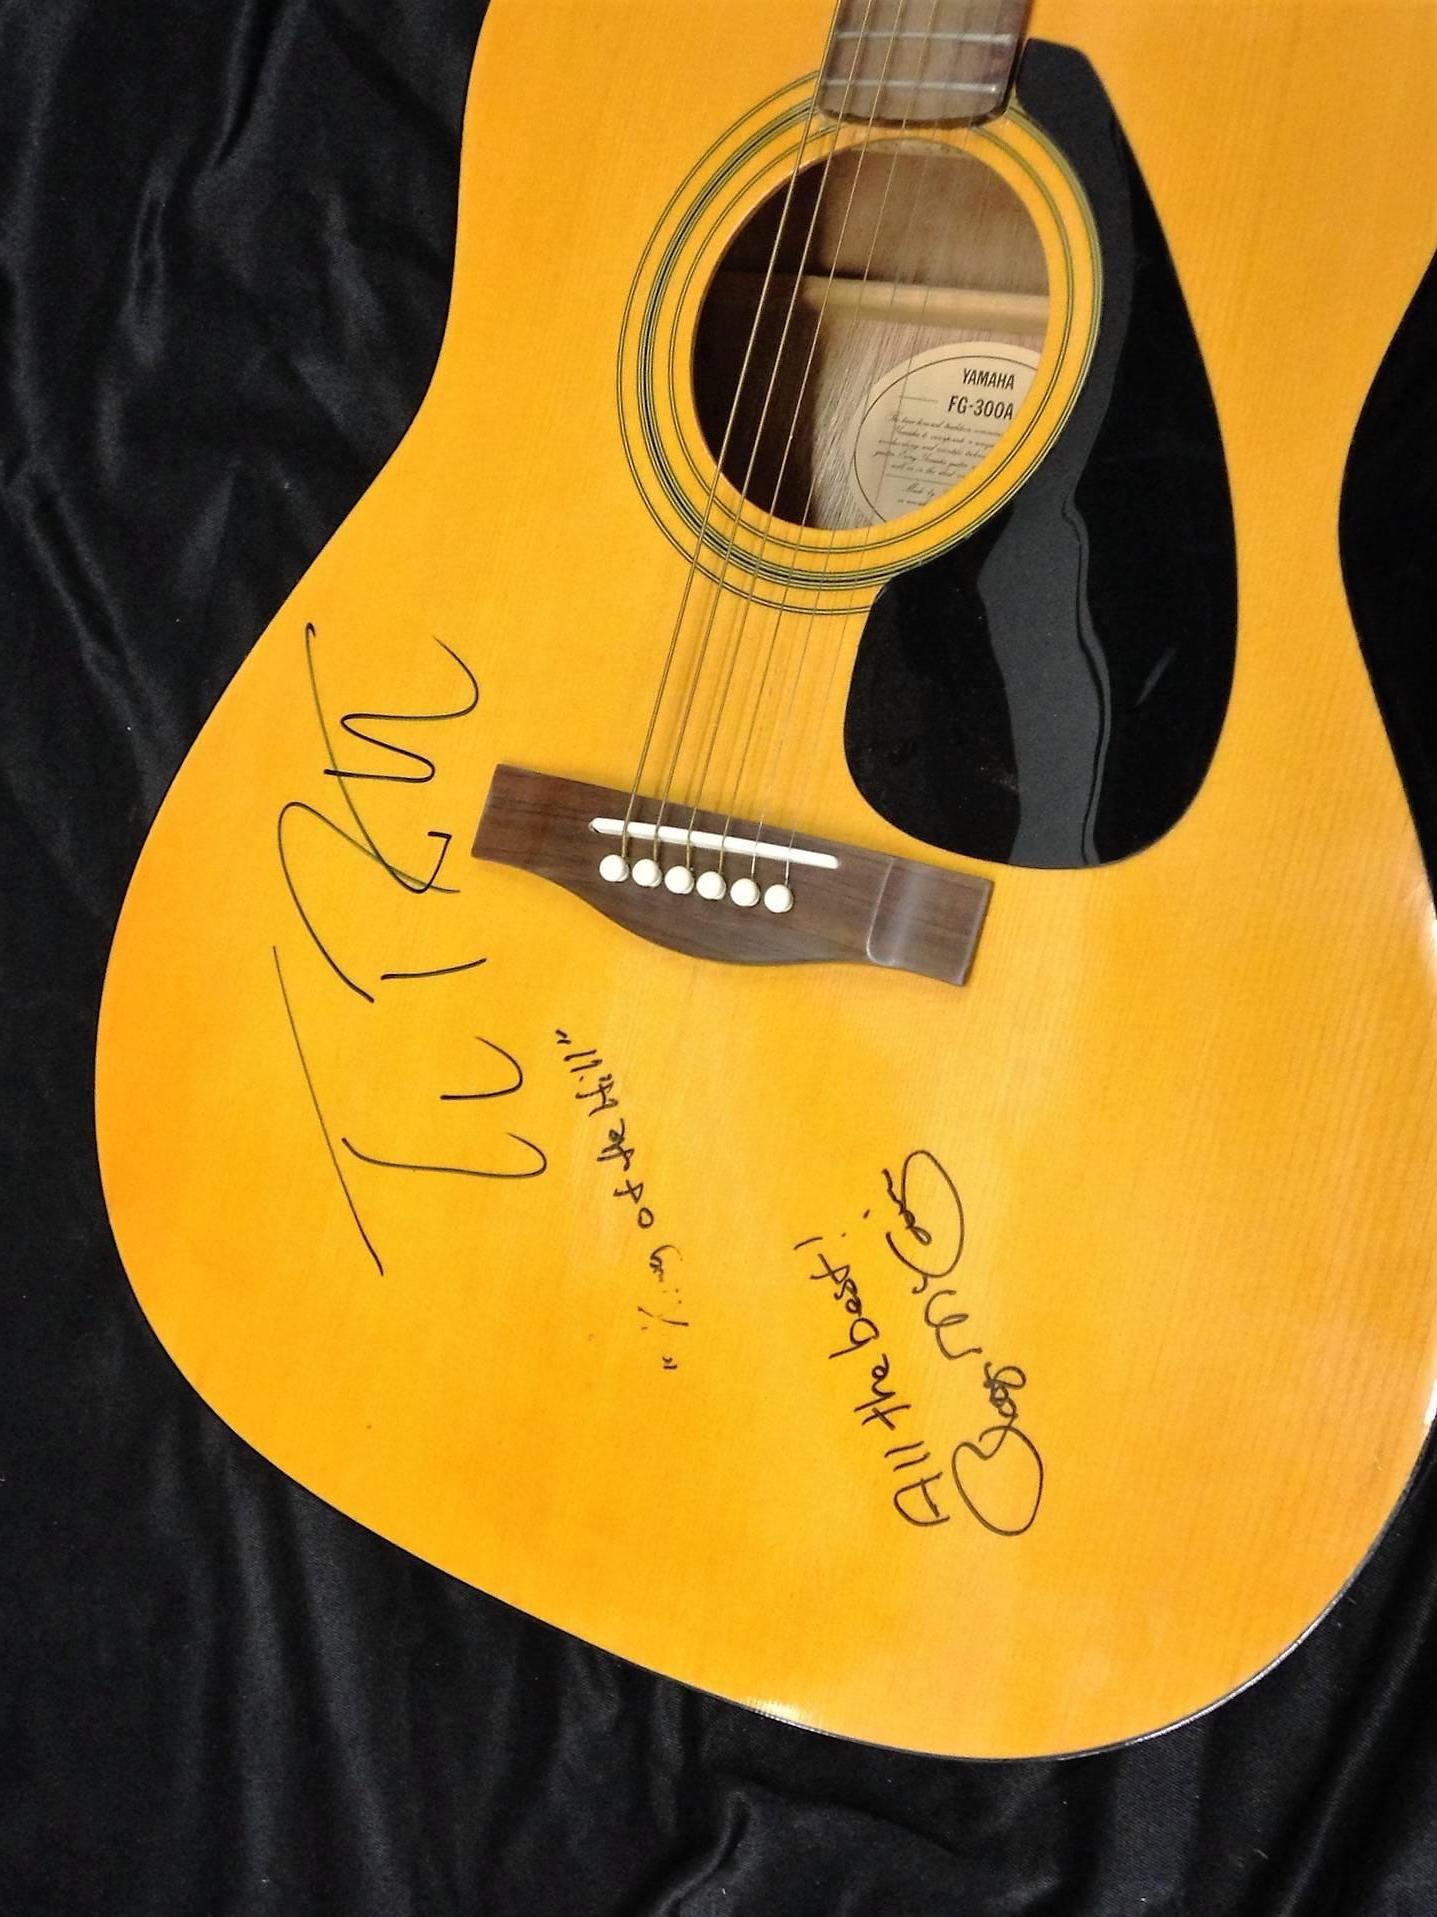 Modern Tom Petty and Roger McGuinn Autographed Guitar For Sale